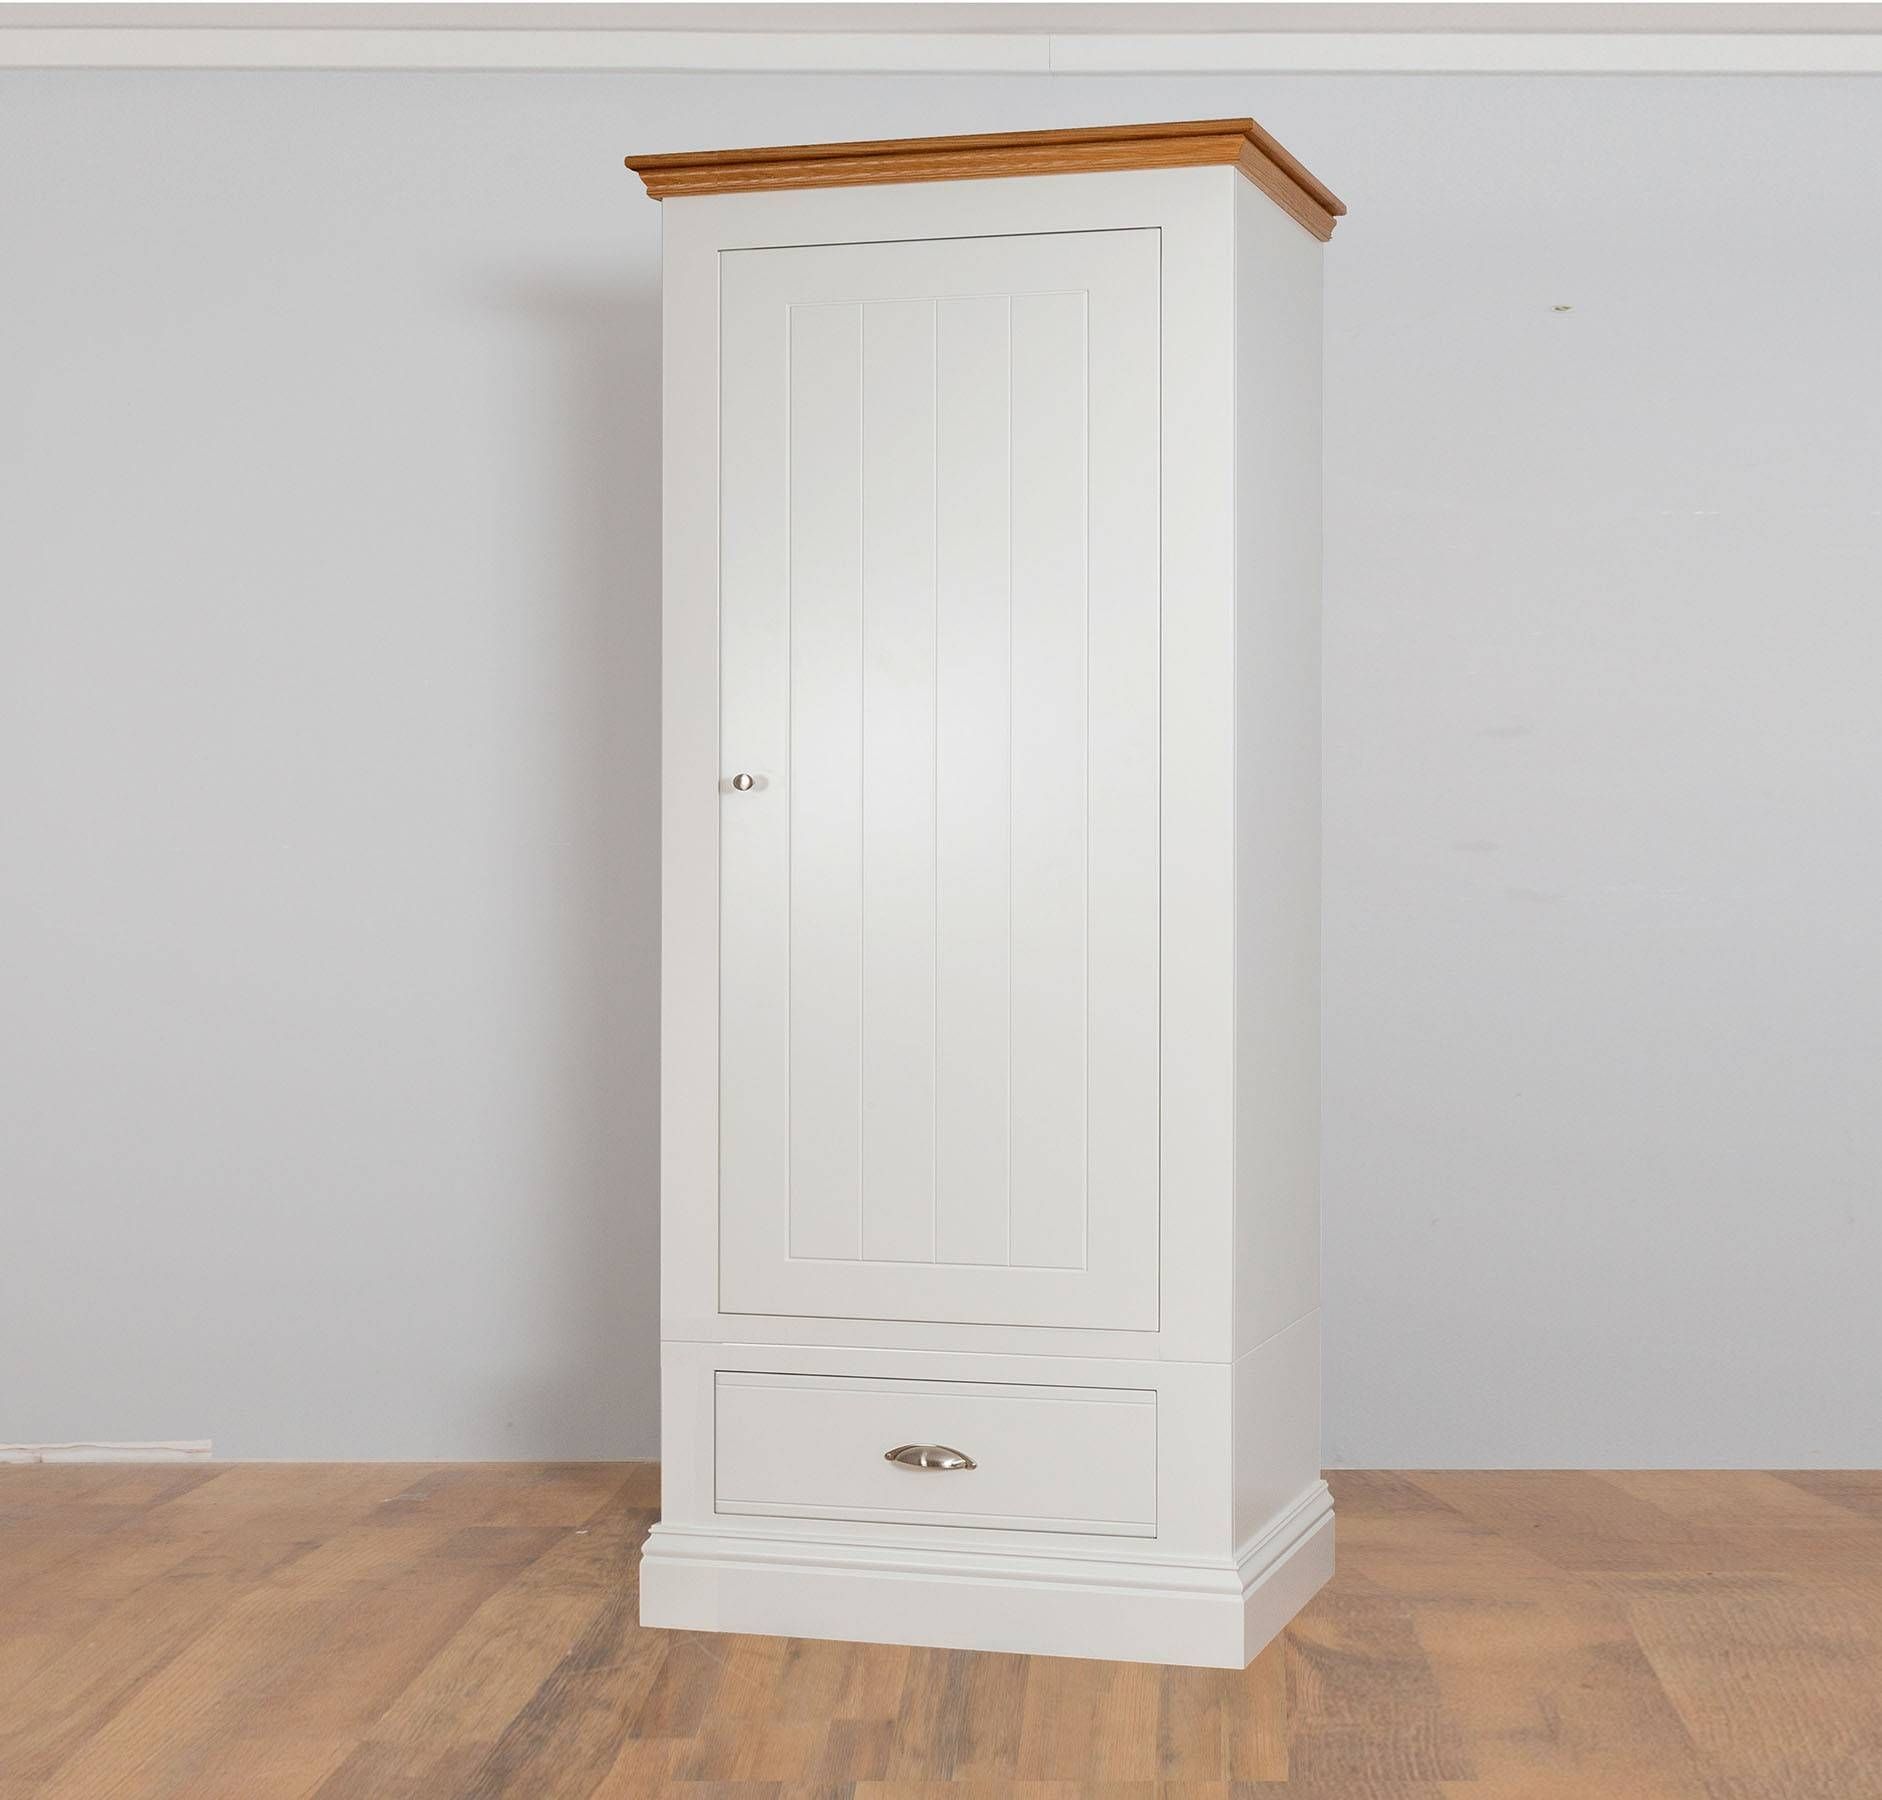 Jared Kushner Tags : 44 Unbelievable White Single Door Wardrobe Intended For Single White Wardrobes With Drawers (View 9 of 15)